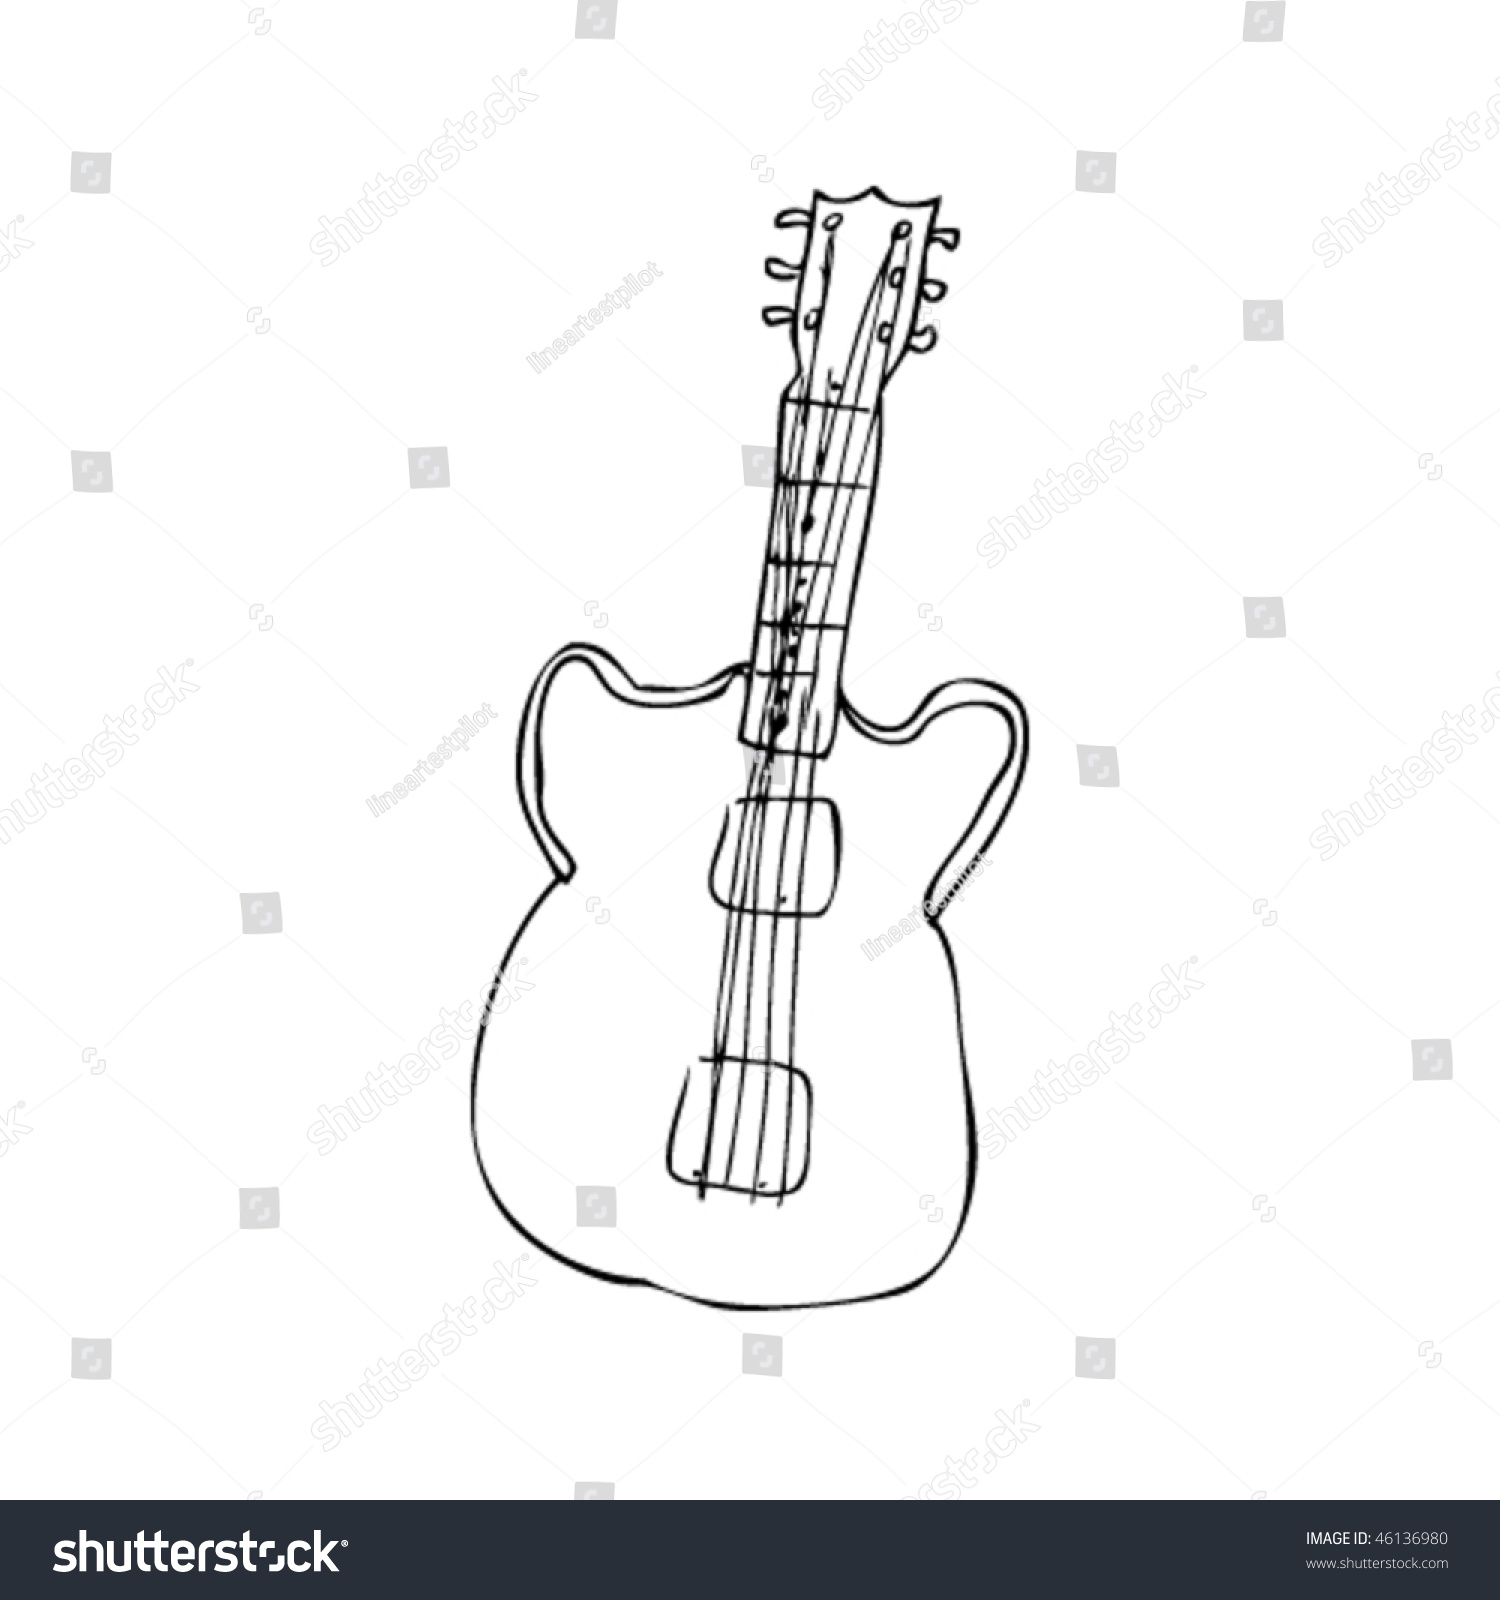 stock-vector-child-s-drawing-of-a-guitar-46136980.jpg